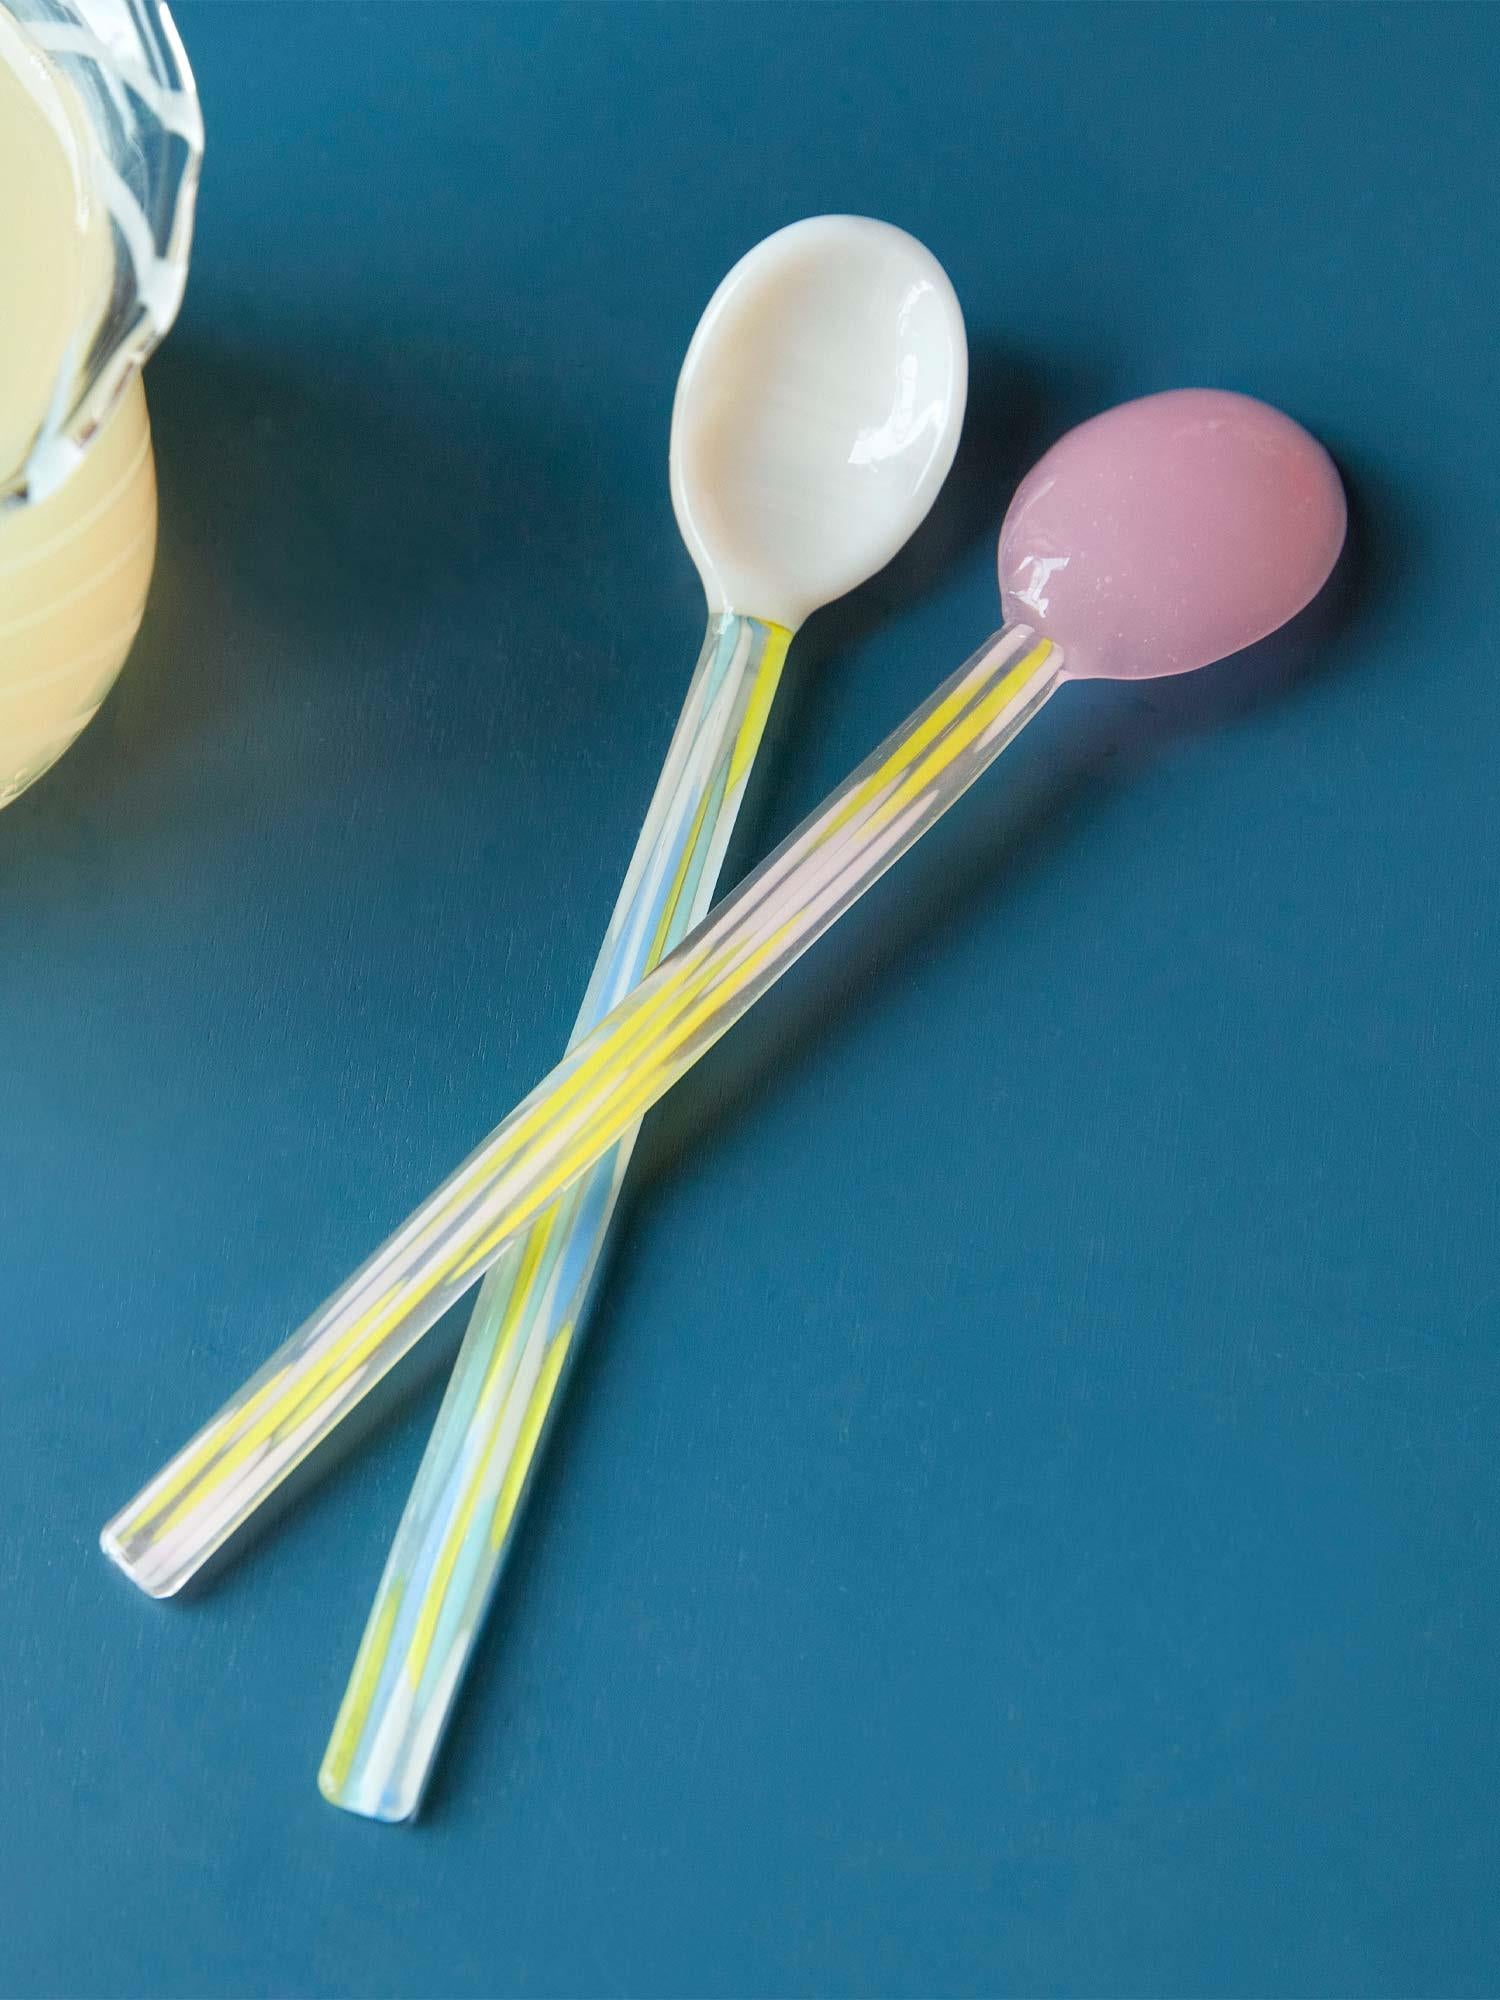 Glass Spoons Flat Set of 2 - Light Pink/White